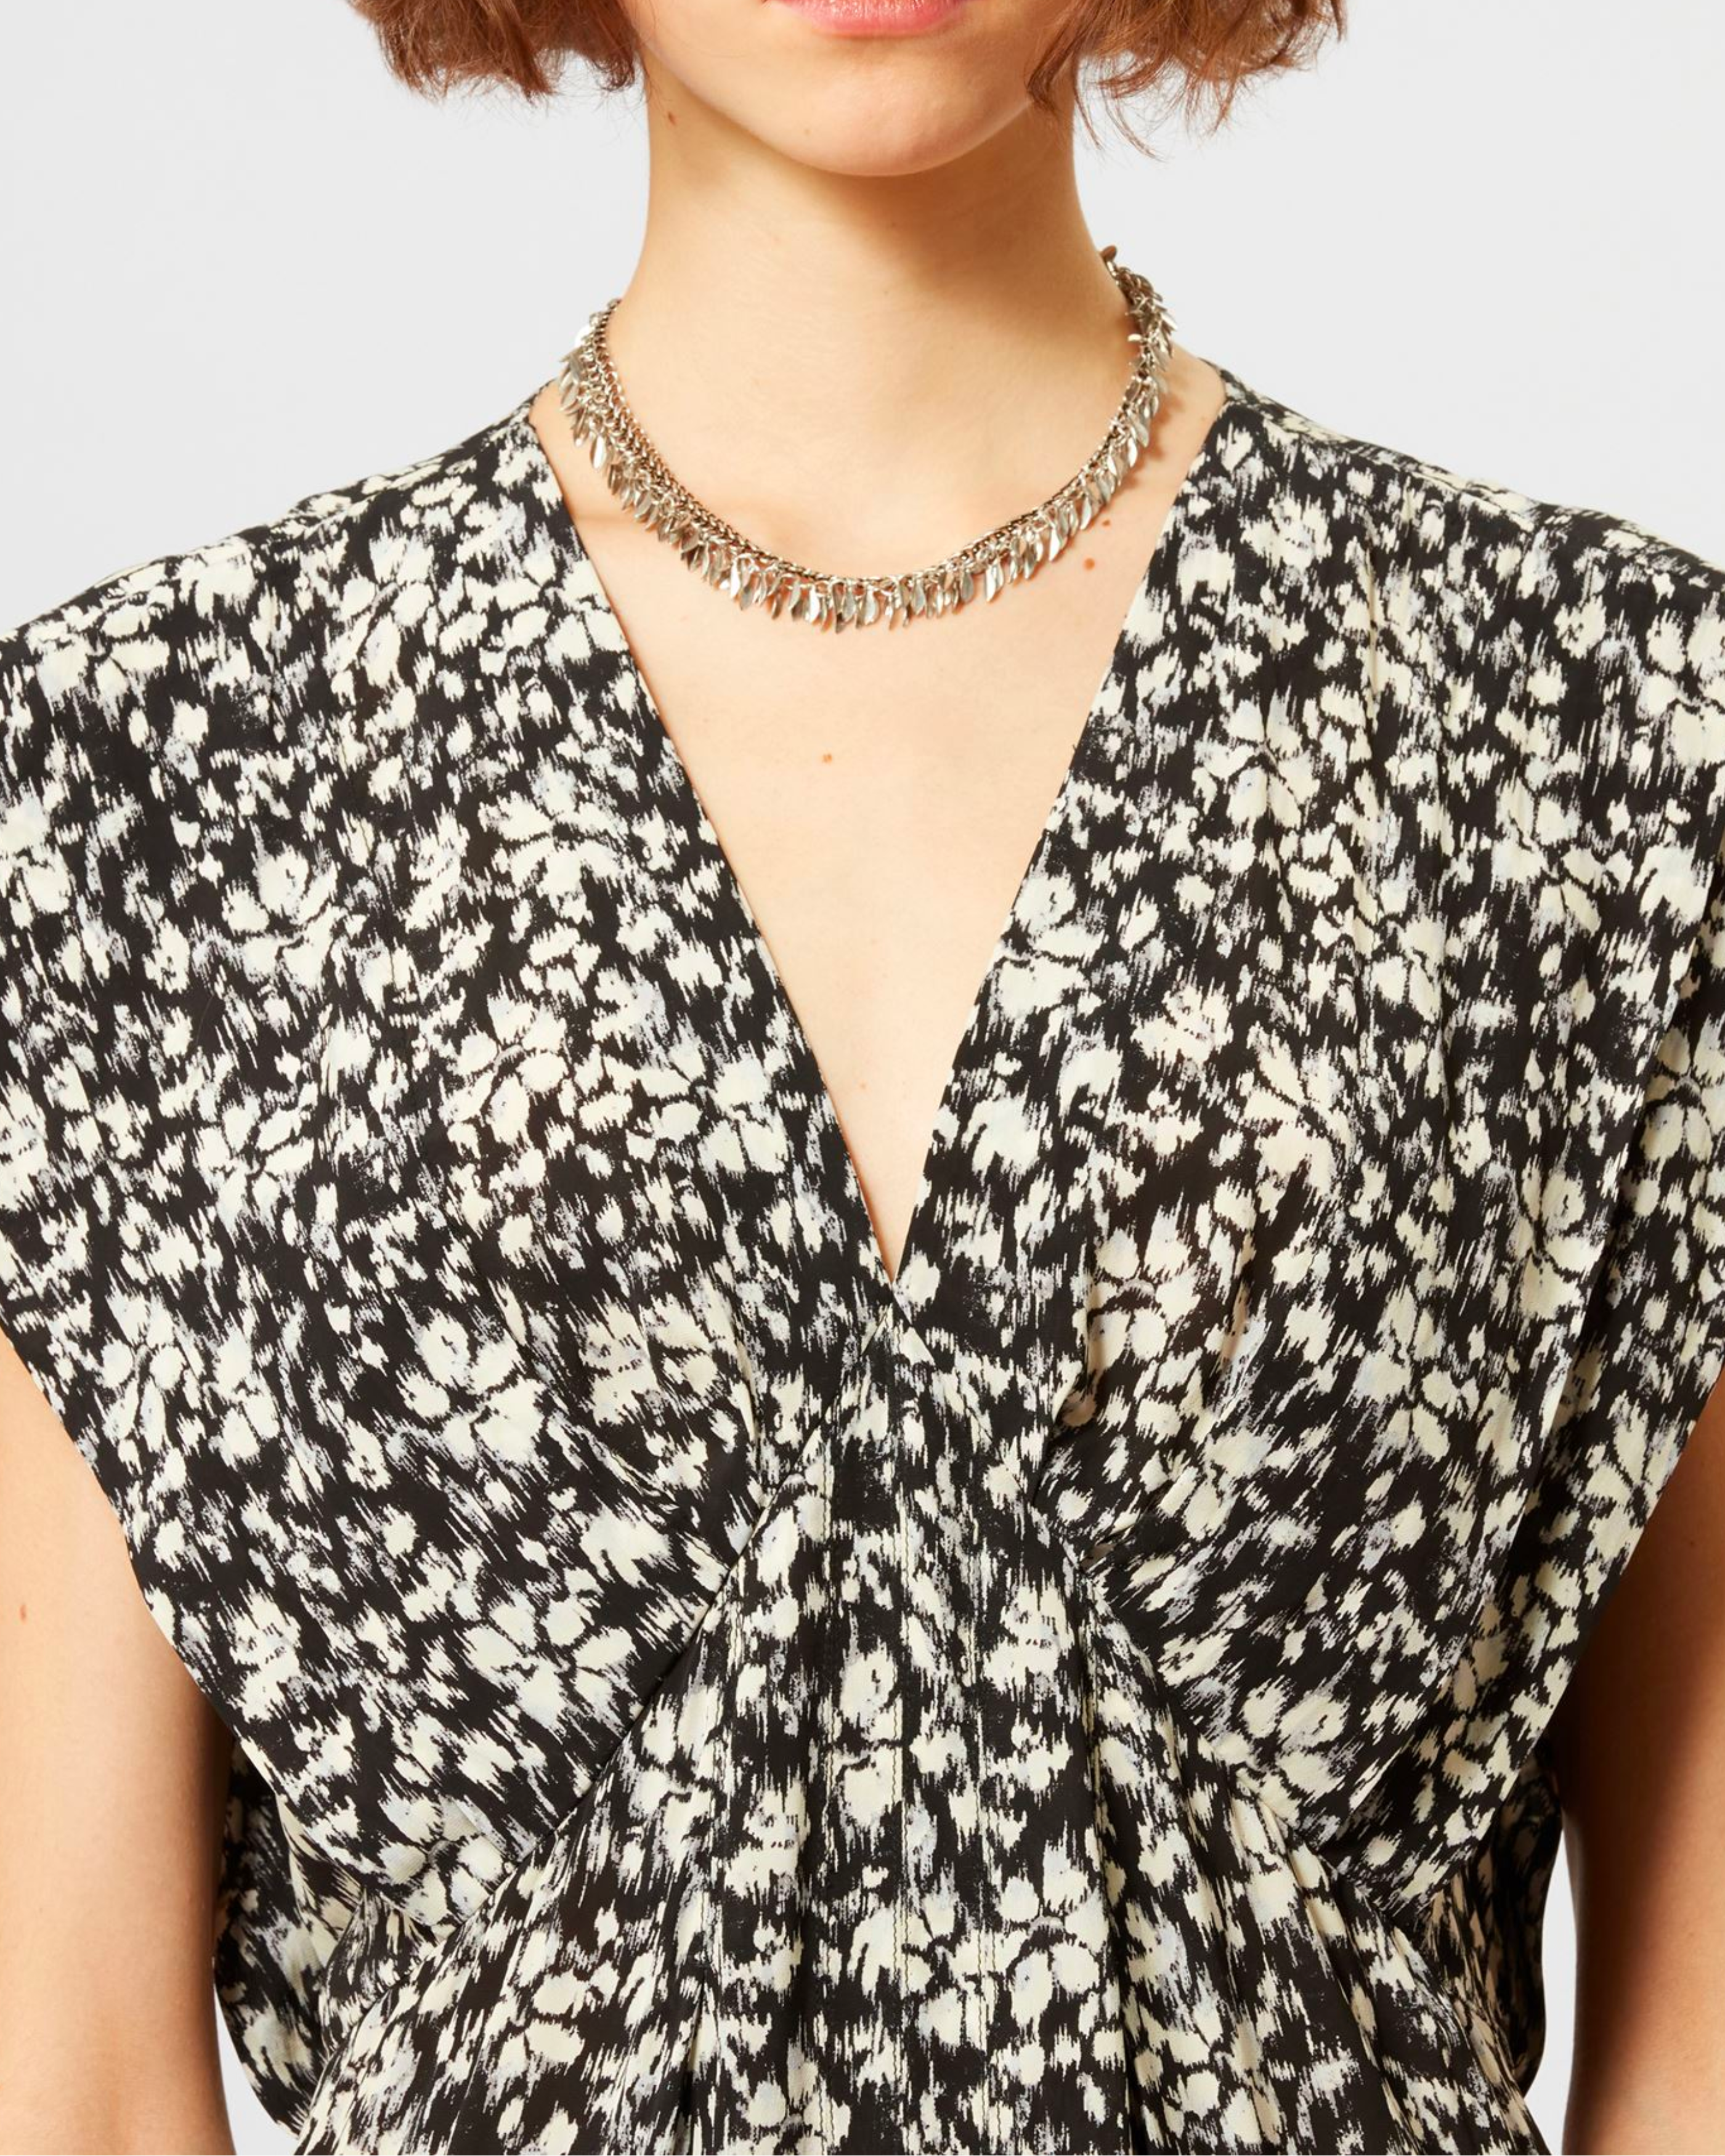 Isabel Marant Epolia Dress in Black and White Floral